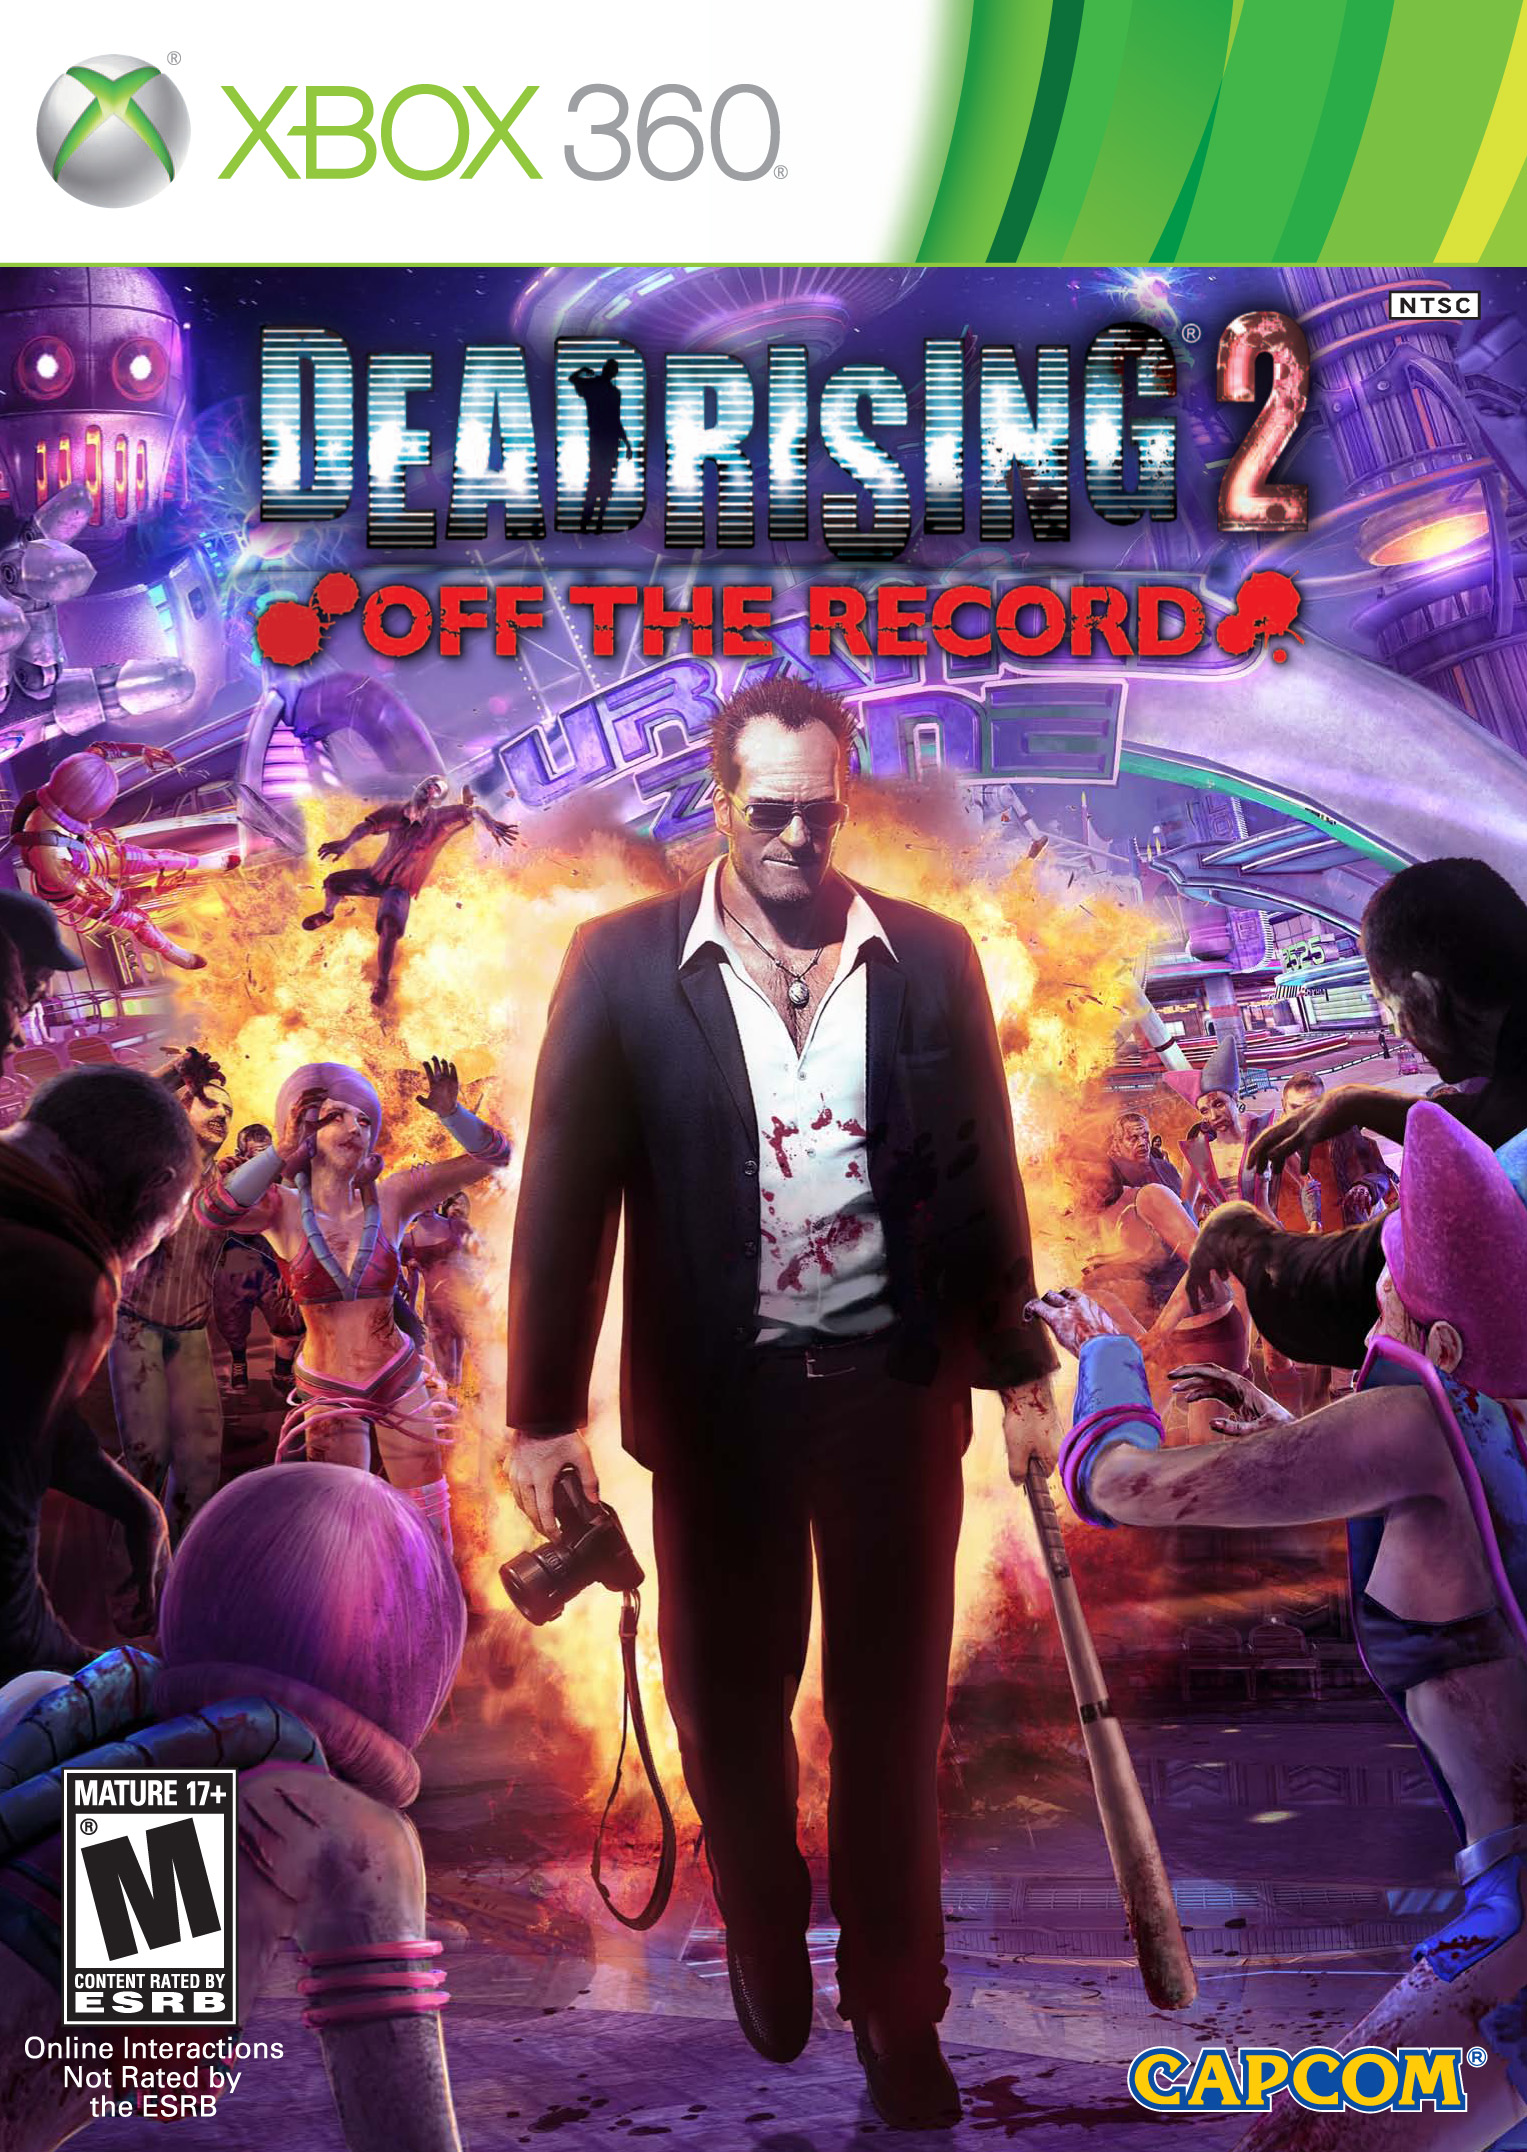 Disappointment valley Parcel Dead Rising 2: Off the Record | Dead Rising Wiki | Fandom